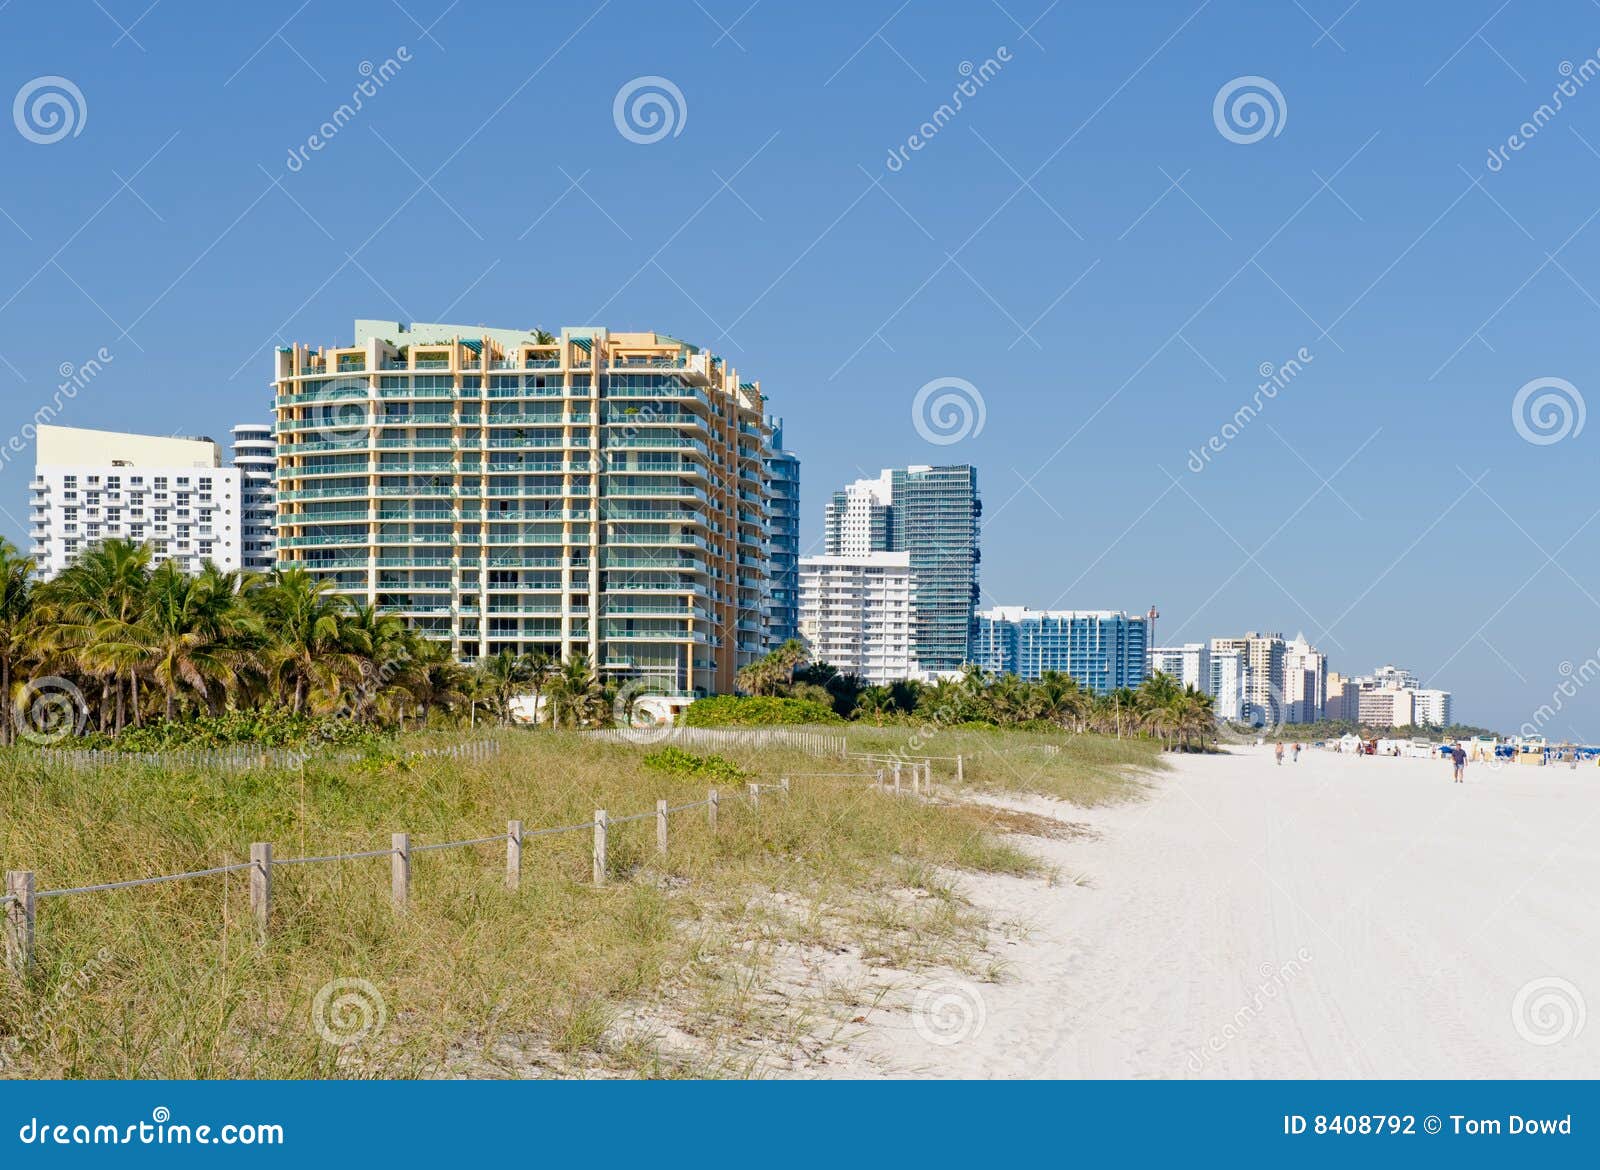 hotels on the beach